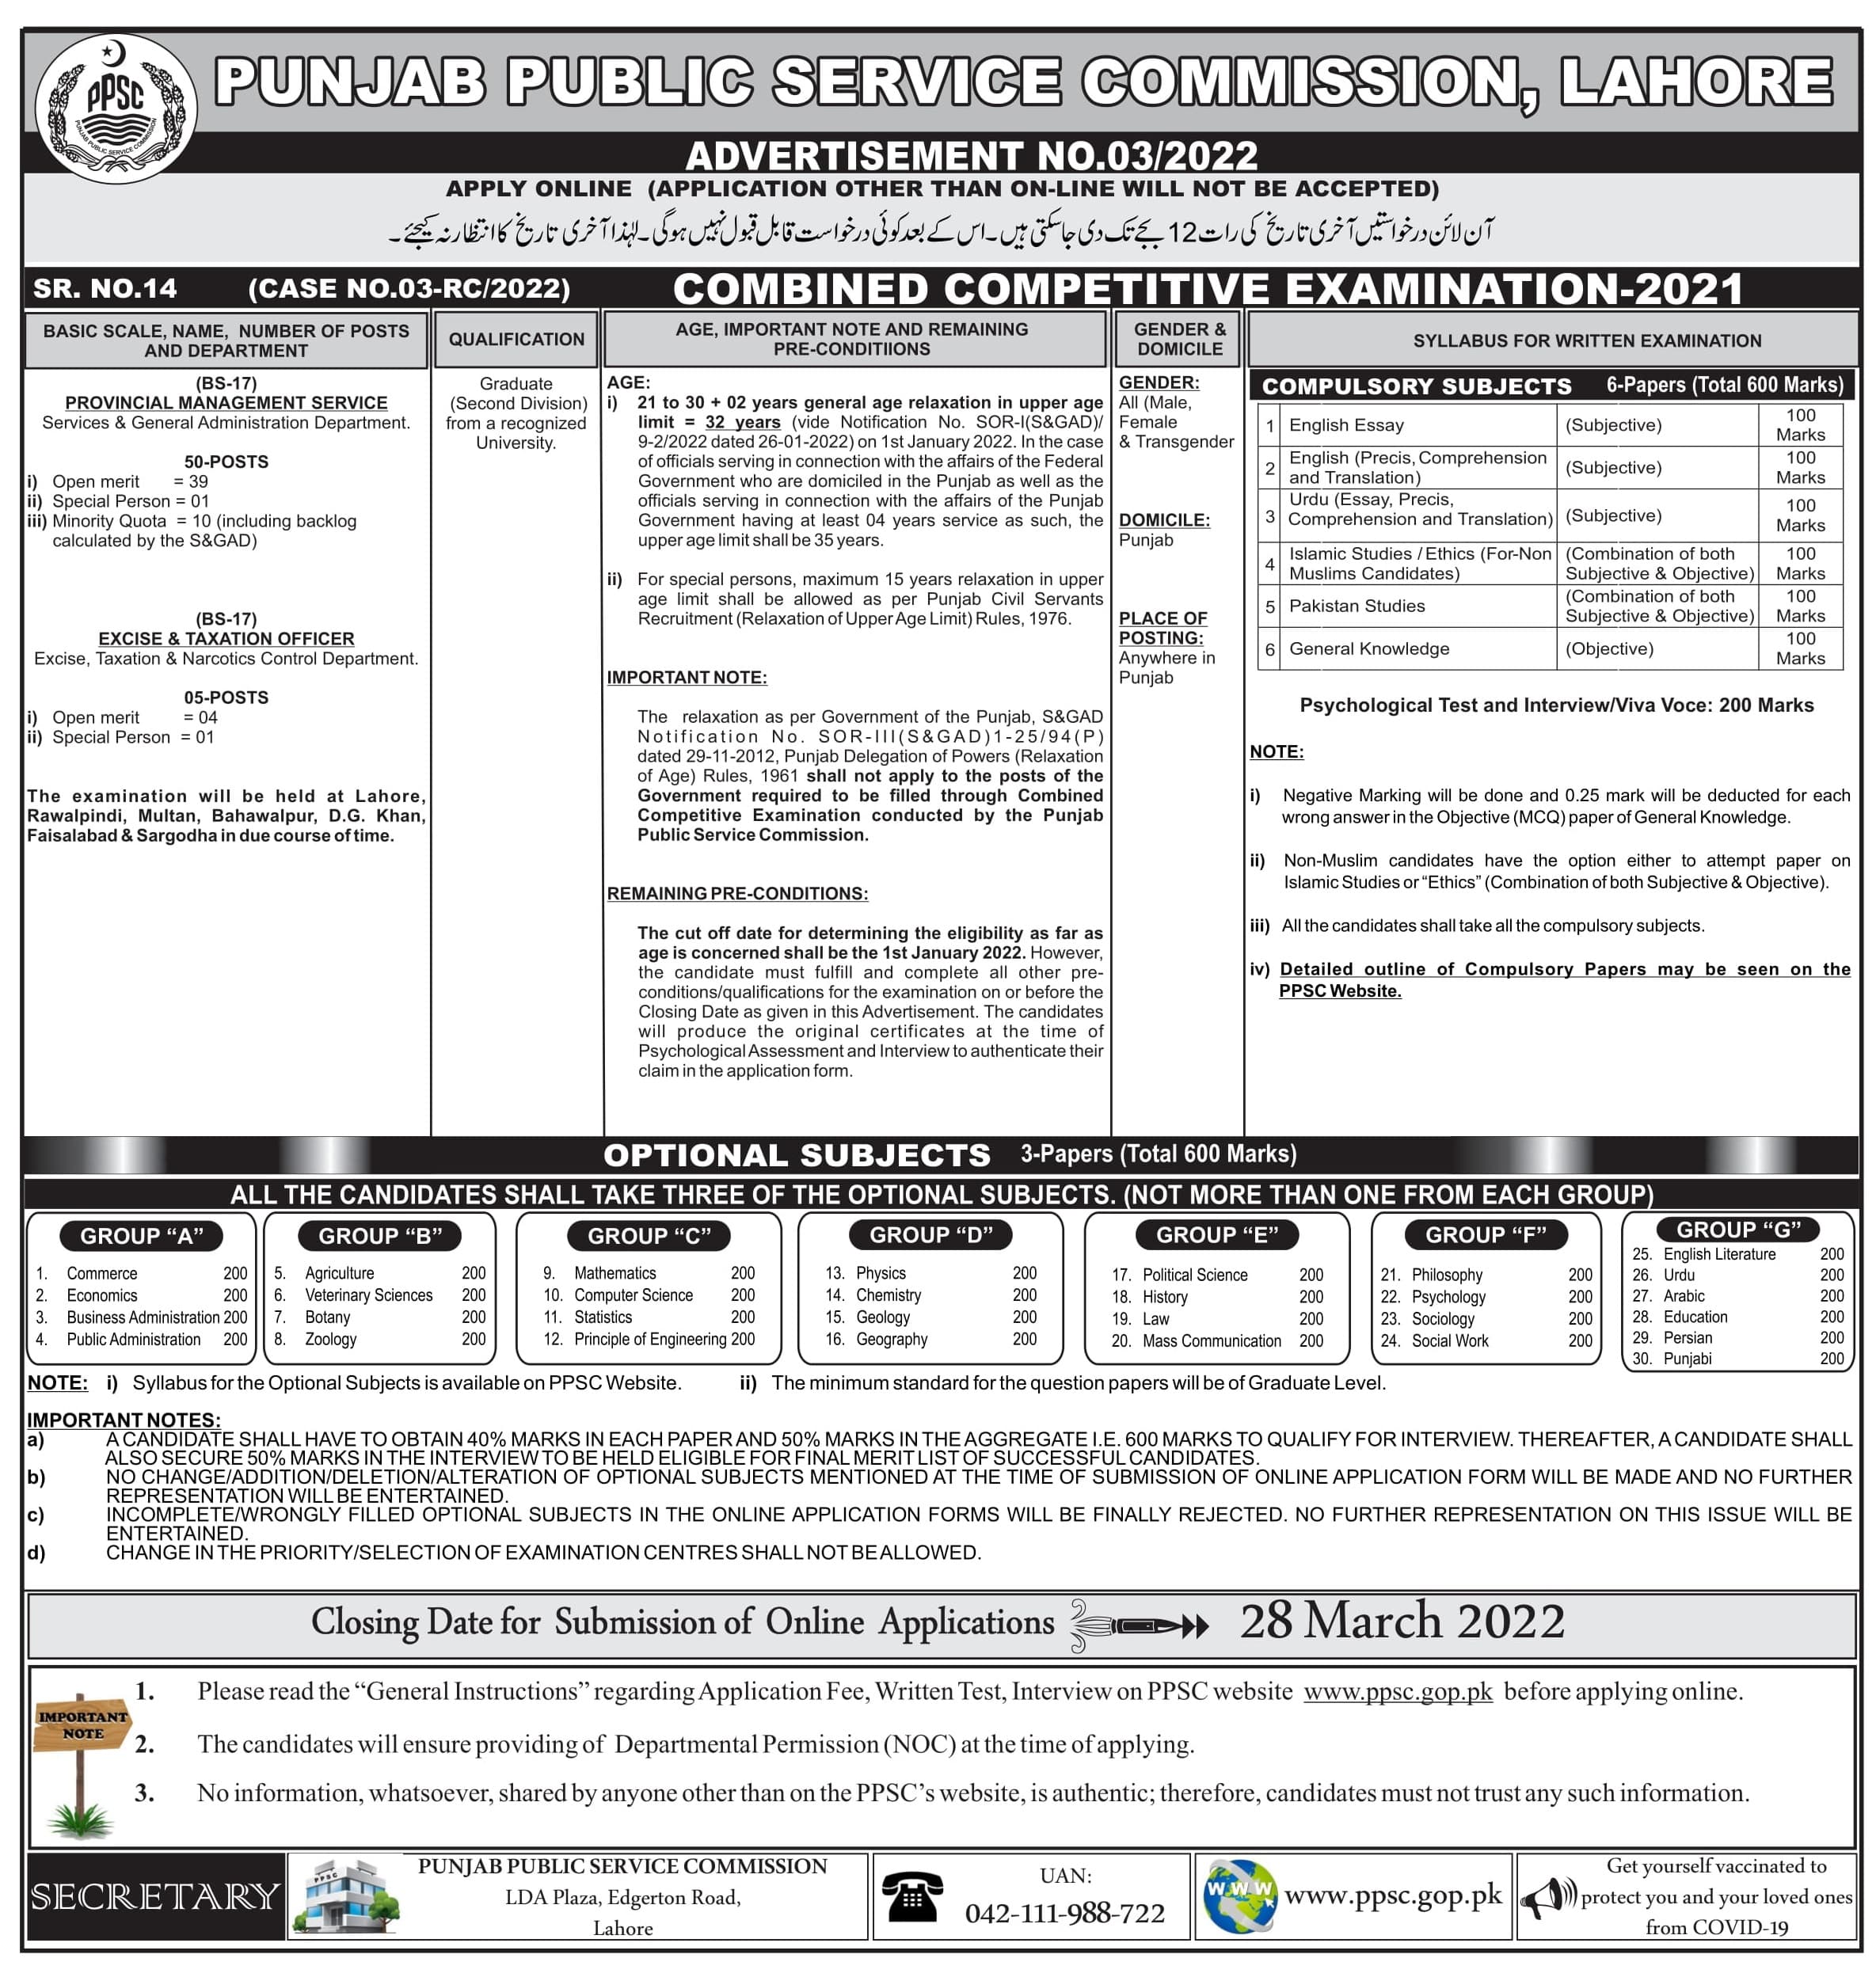 PPSC Jobs Combined Competitive Examination 2022